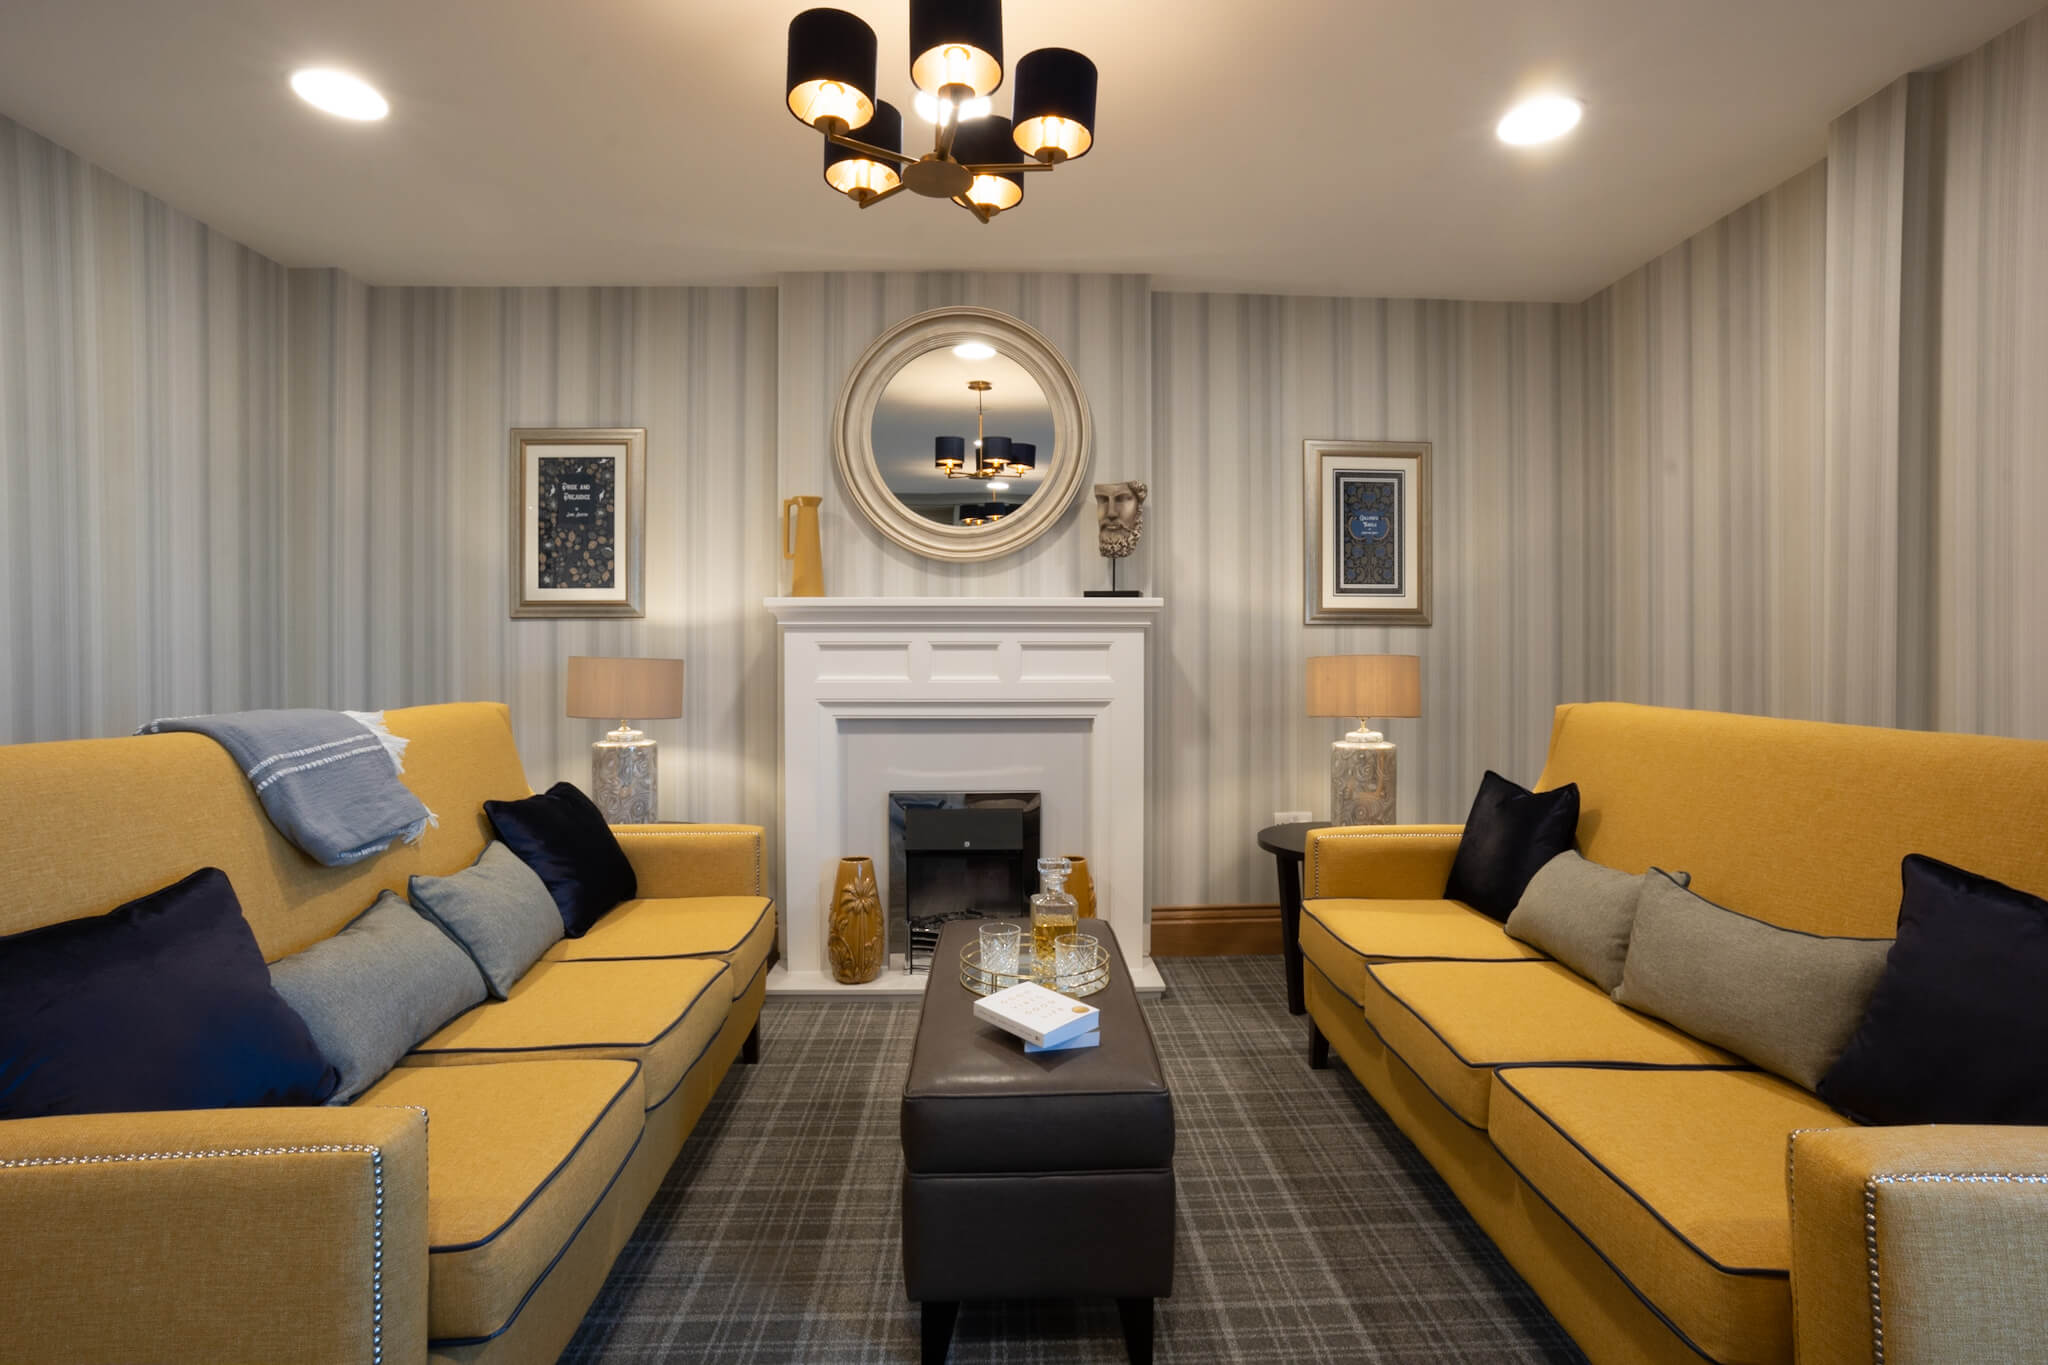 Striped wallpaper. Circle mirror above a fireplace. Mustard sofas. Checked carpet.